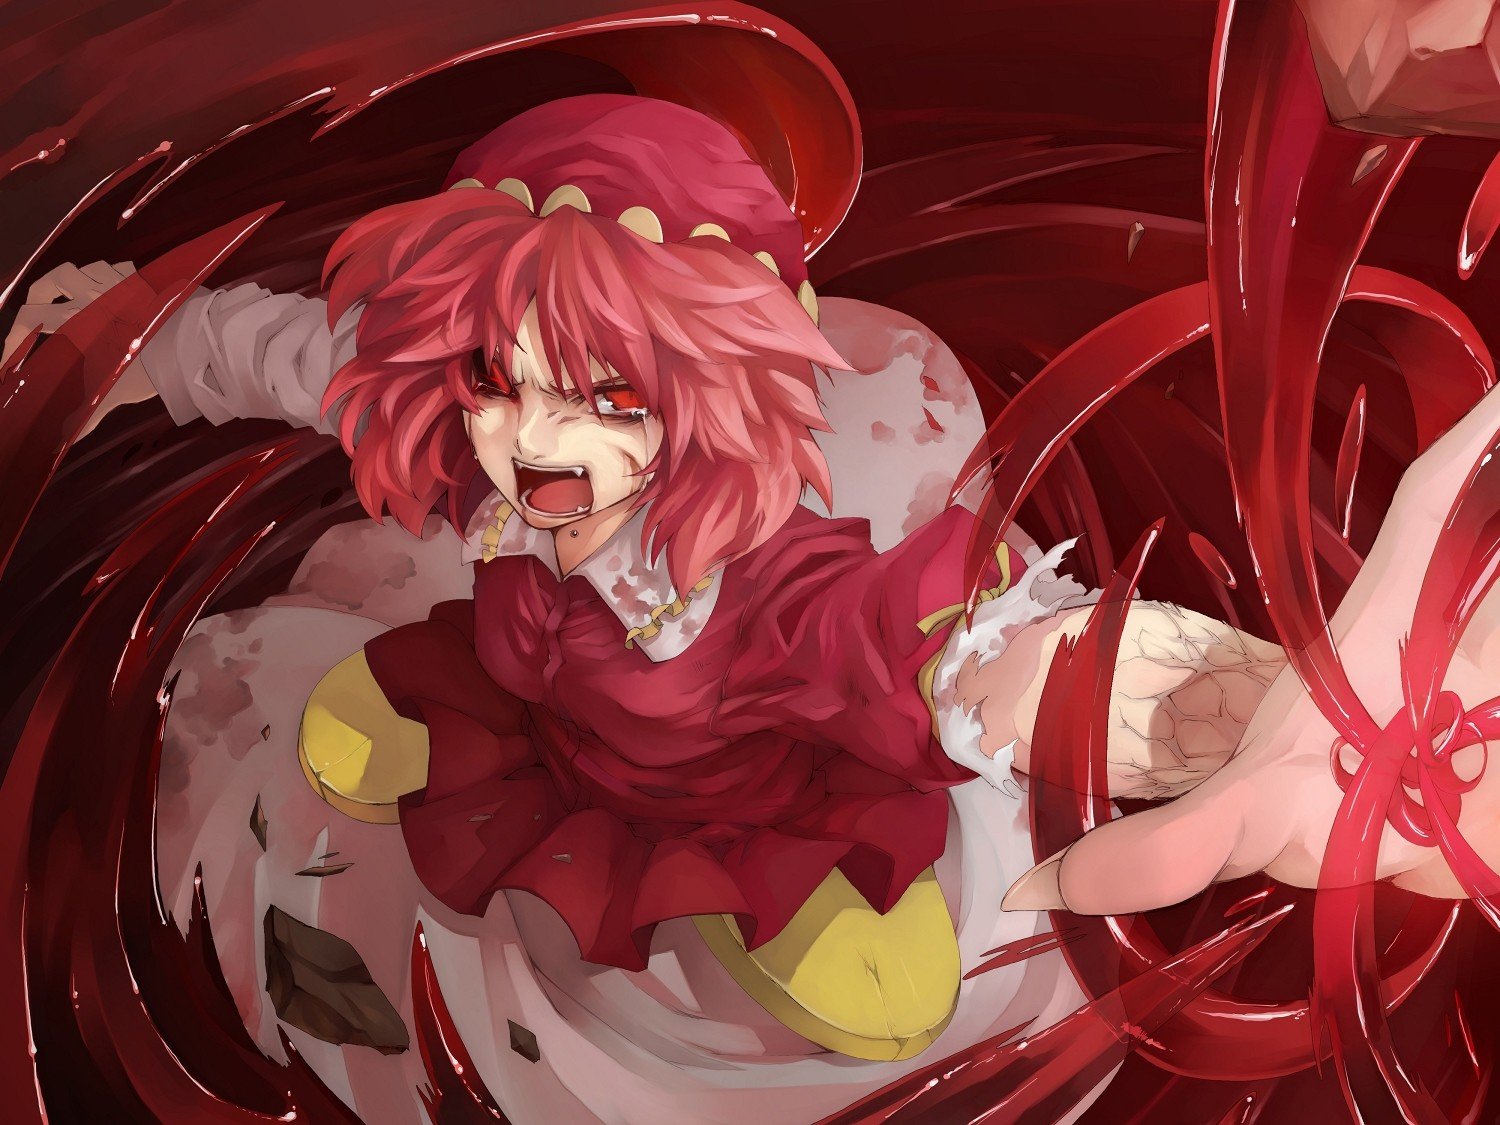 video, Games, Touhou, Red, Dress, Tears, Stones, Destruction, Pink, Hair, Red, Eyes, Short, Hair, Red, Dress, Long, Nails, Open, Mouth, Angry, Fangs, Crying, Action, Hats, Anime, Girls, Kawashiro, Mitori, Spread Wallpaper